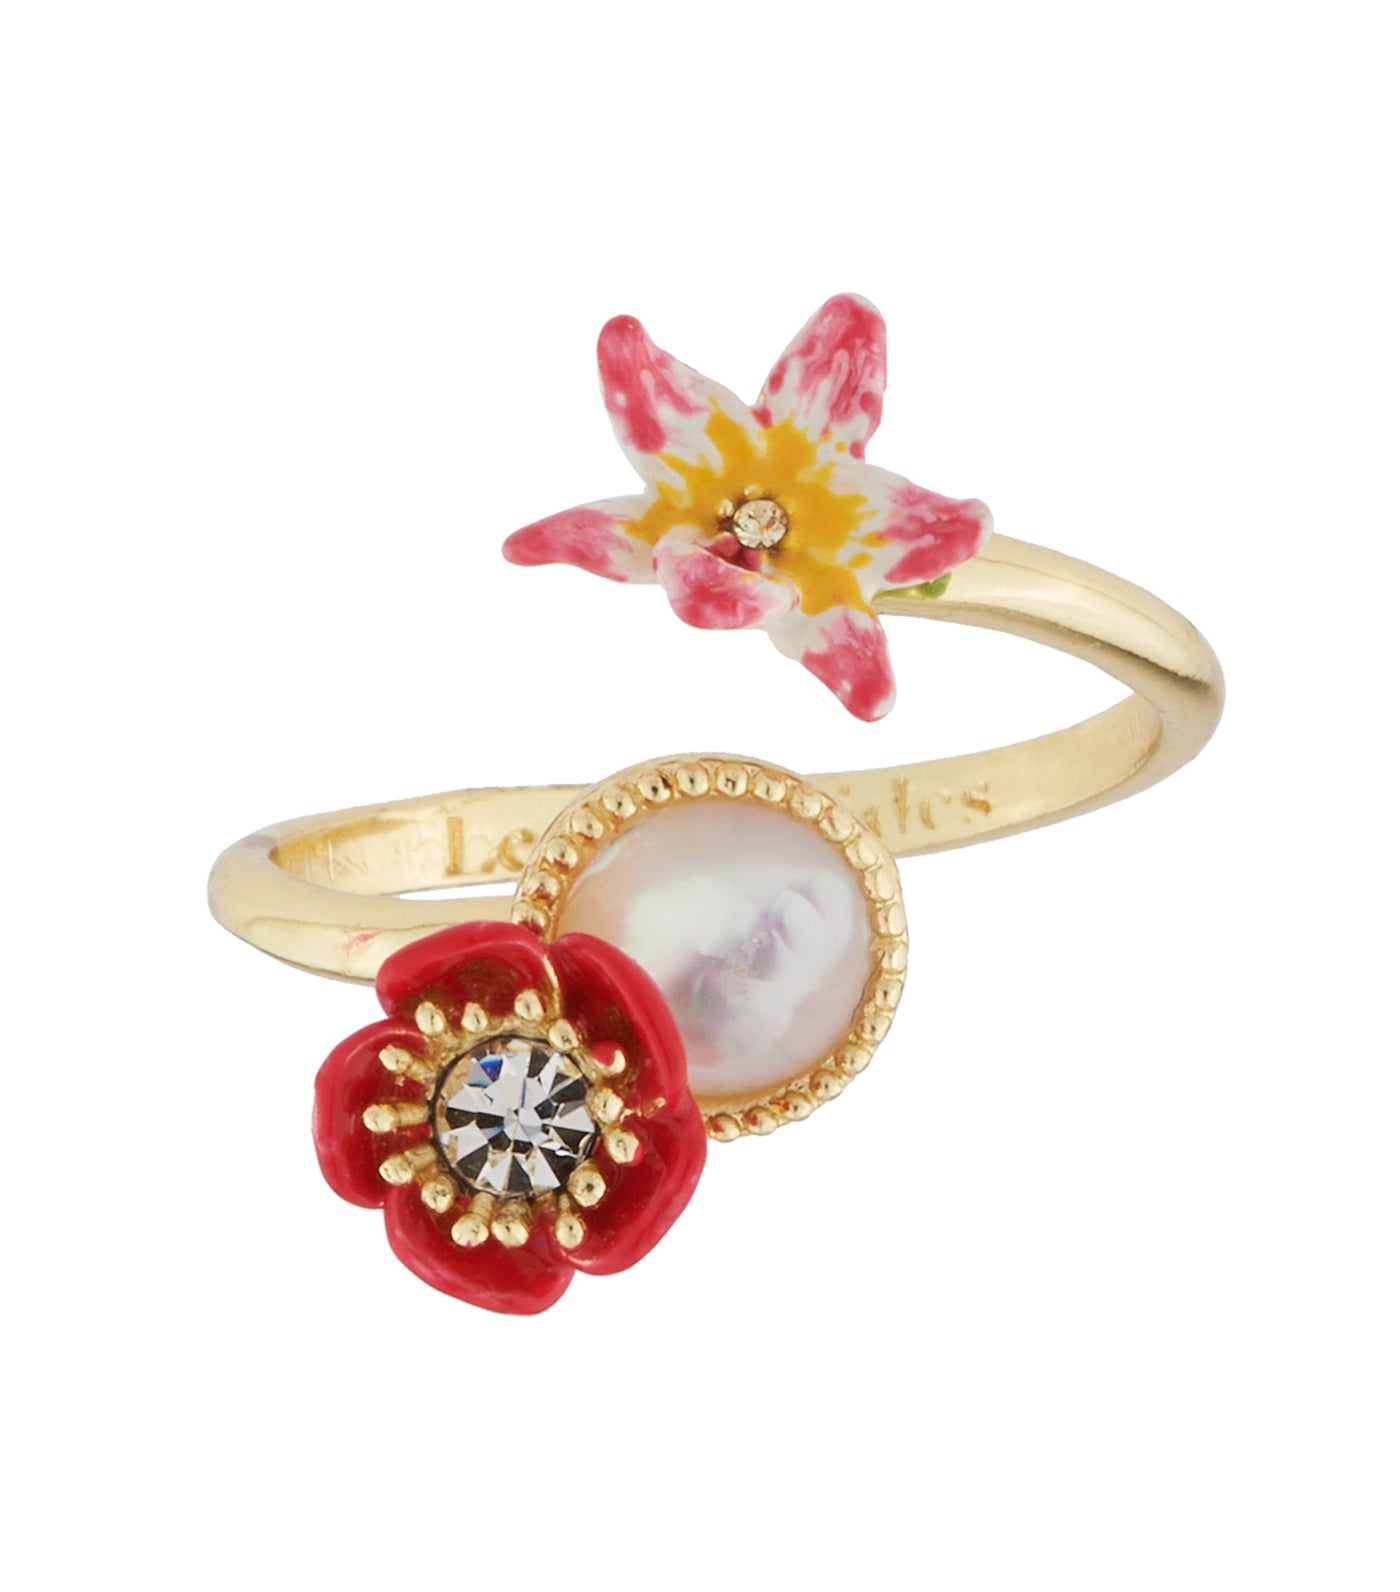 les néréides poppy, white flower, coco-plum and mother-of-pearls adjustable ring